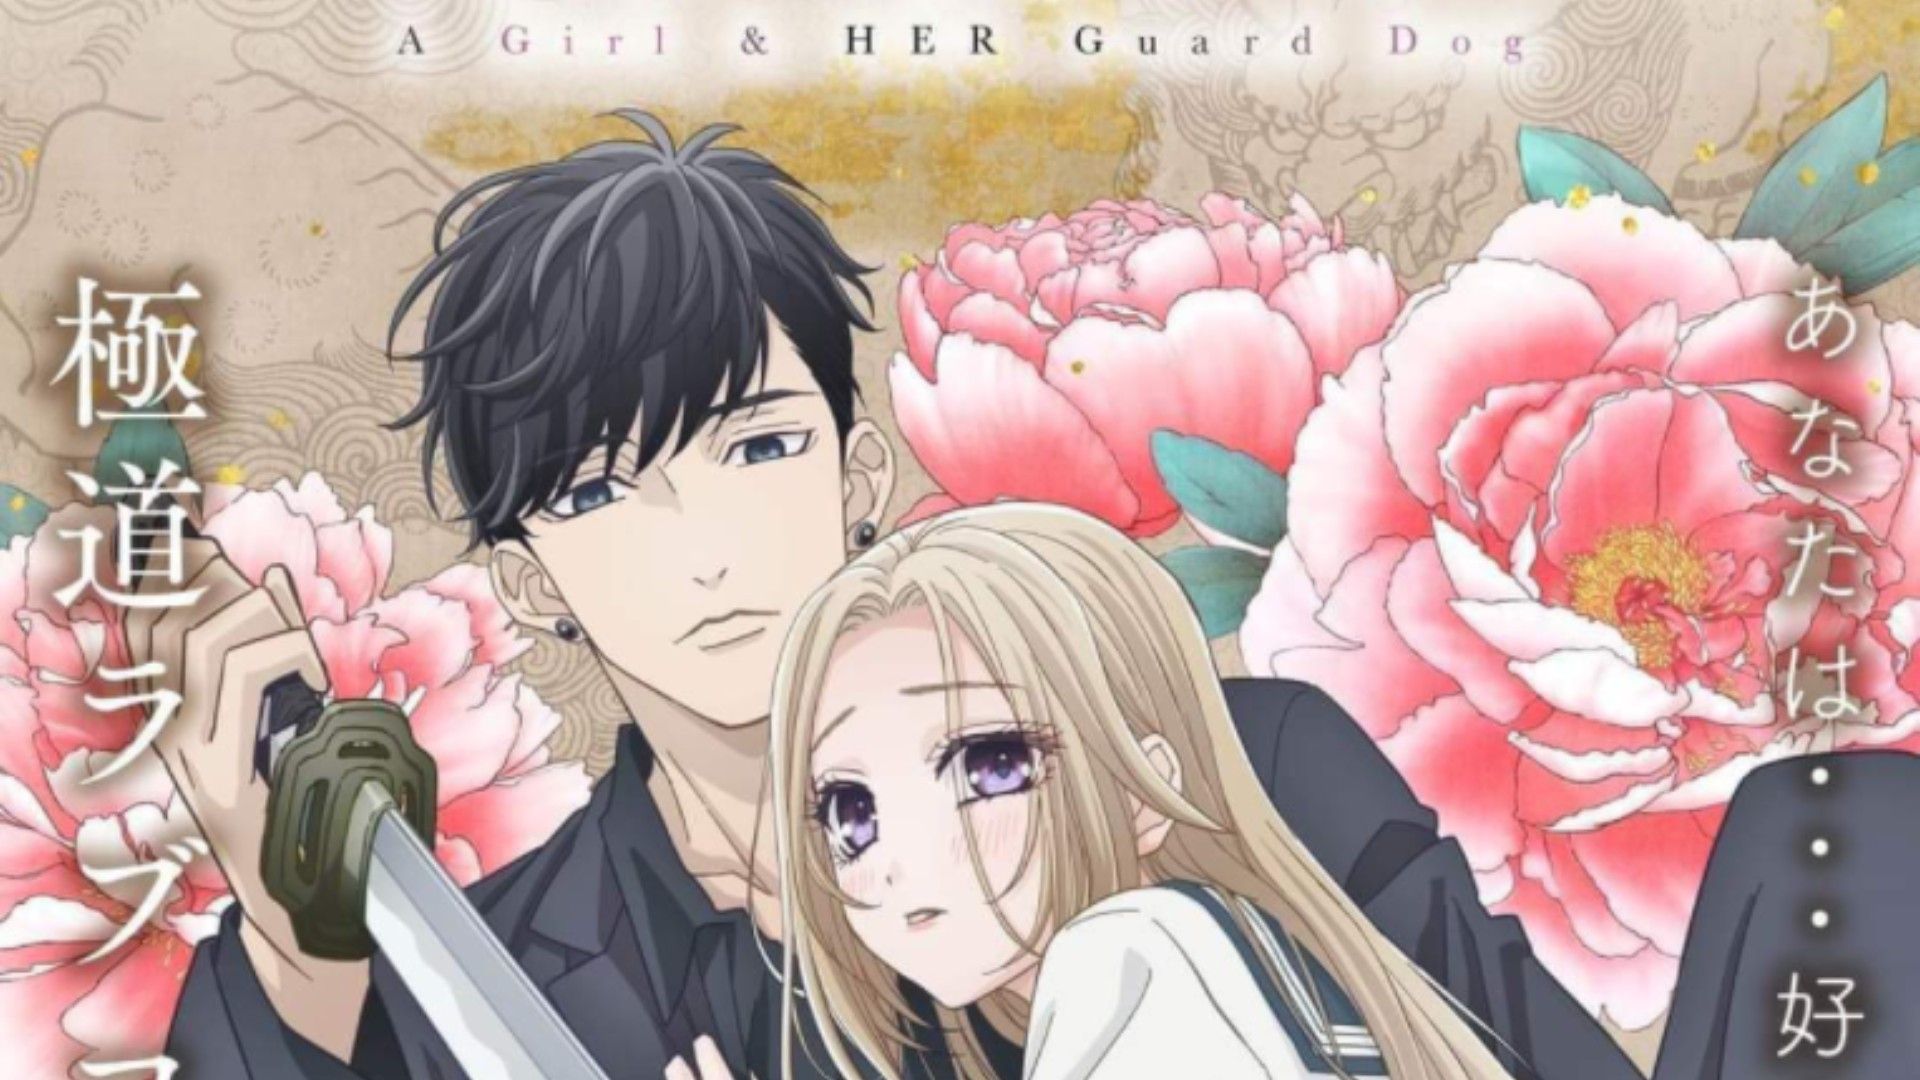 A Girl & Her Guard Dog's Main Trailer Previews Opening Song